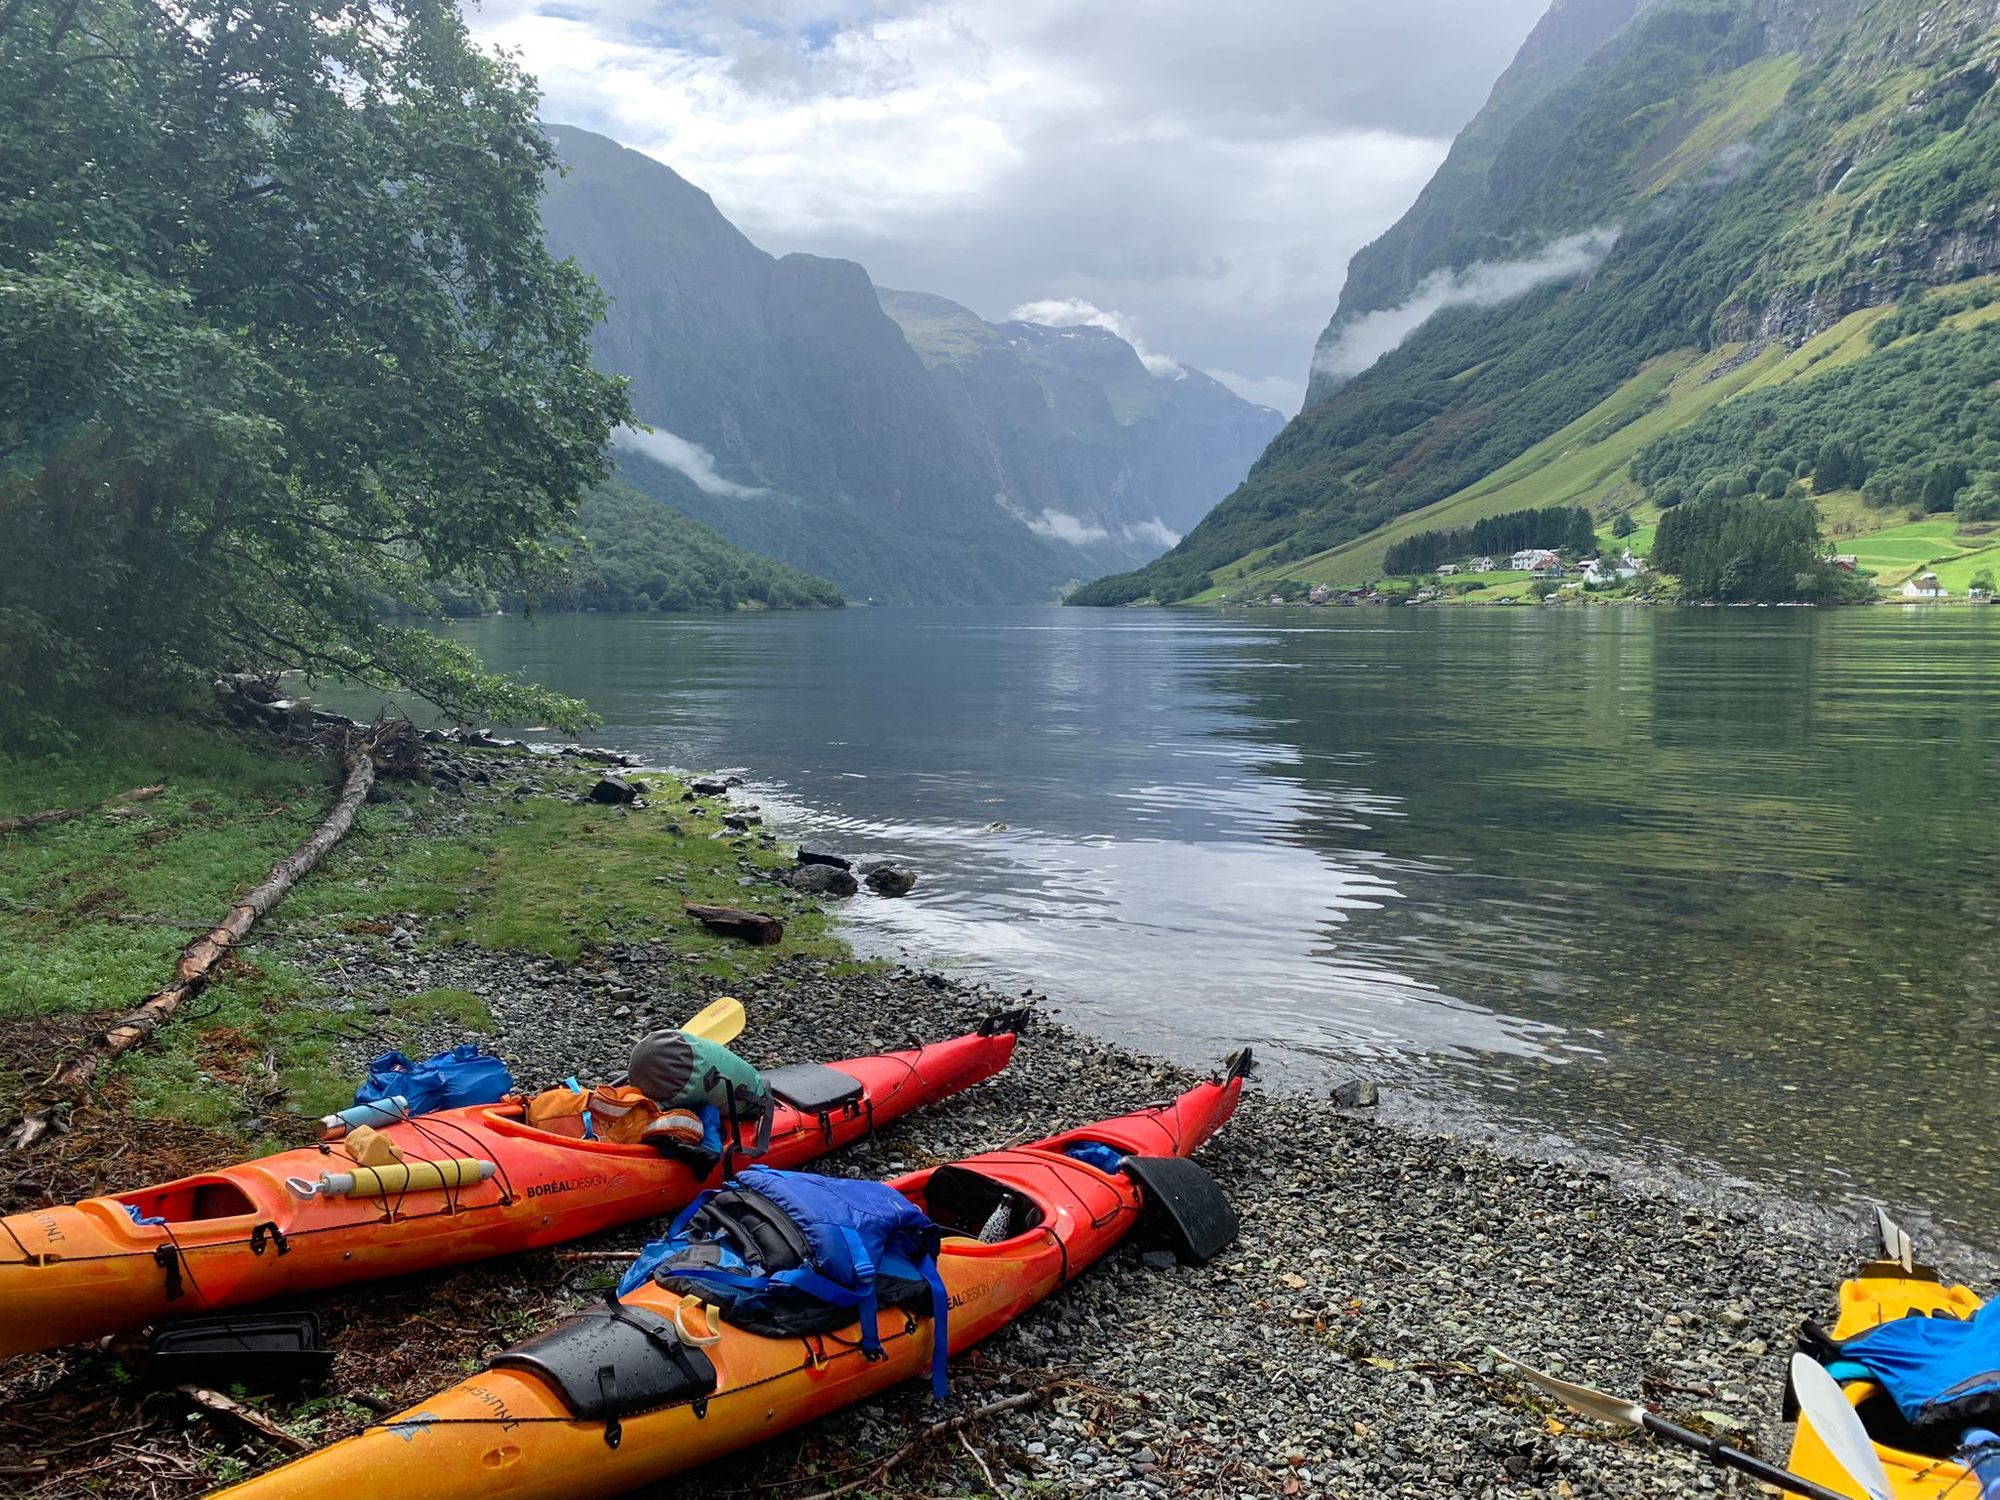 Kayaks pulled up on to the shore of the fjord in Norway.